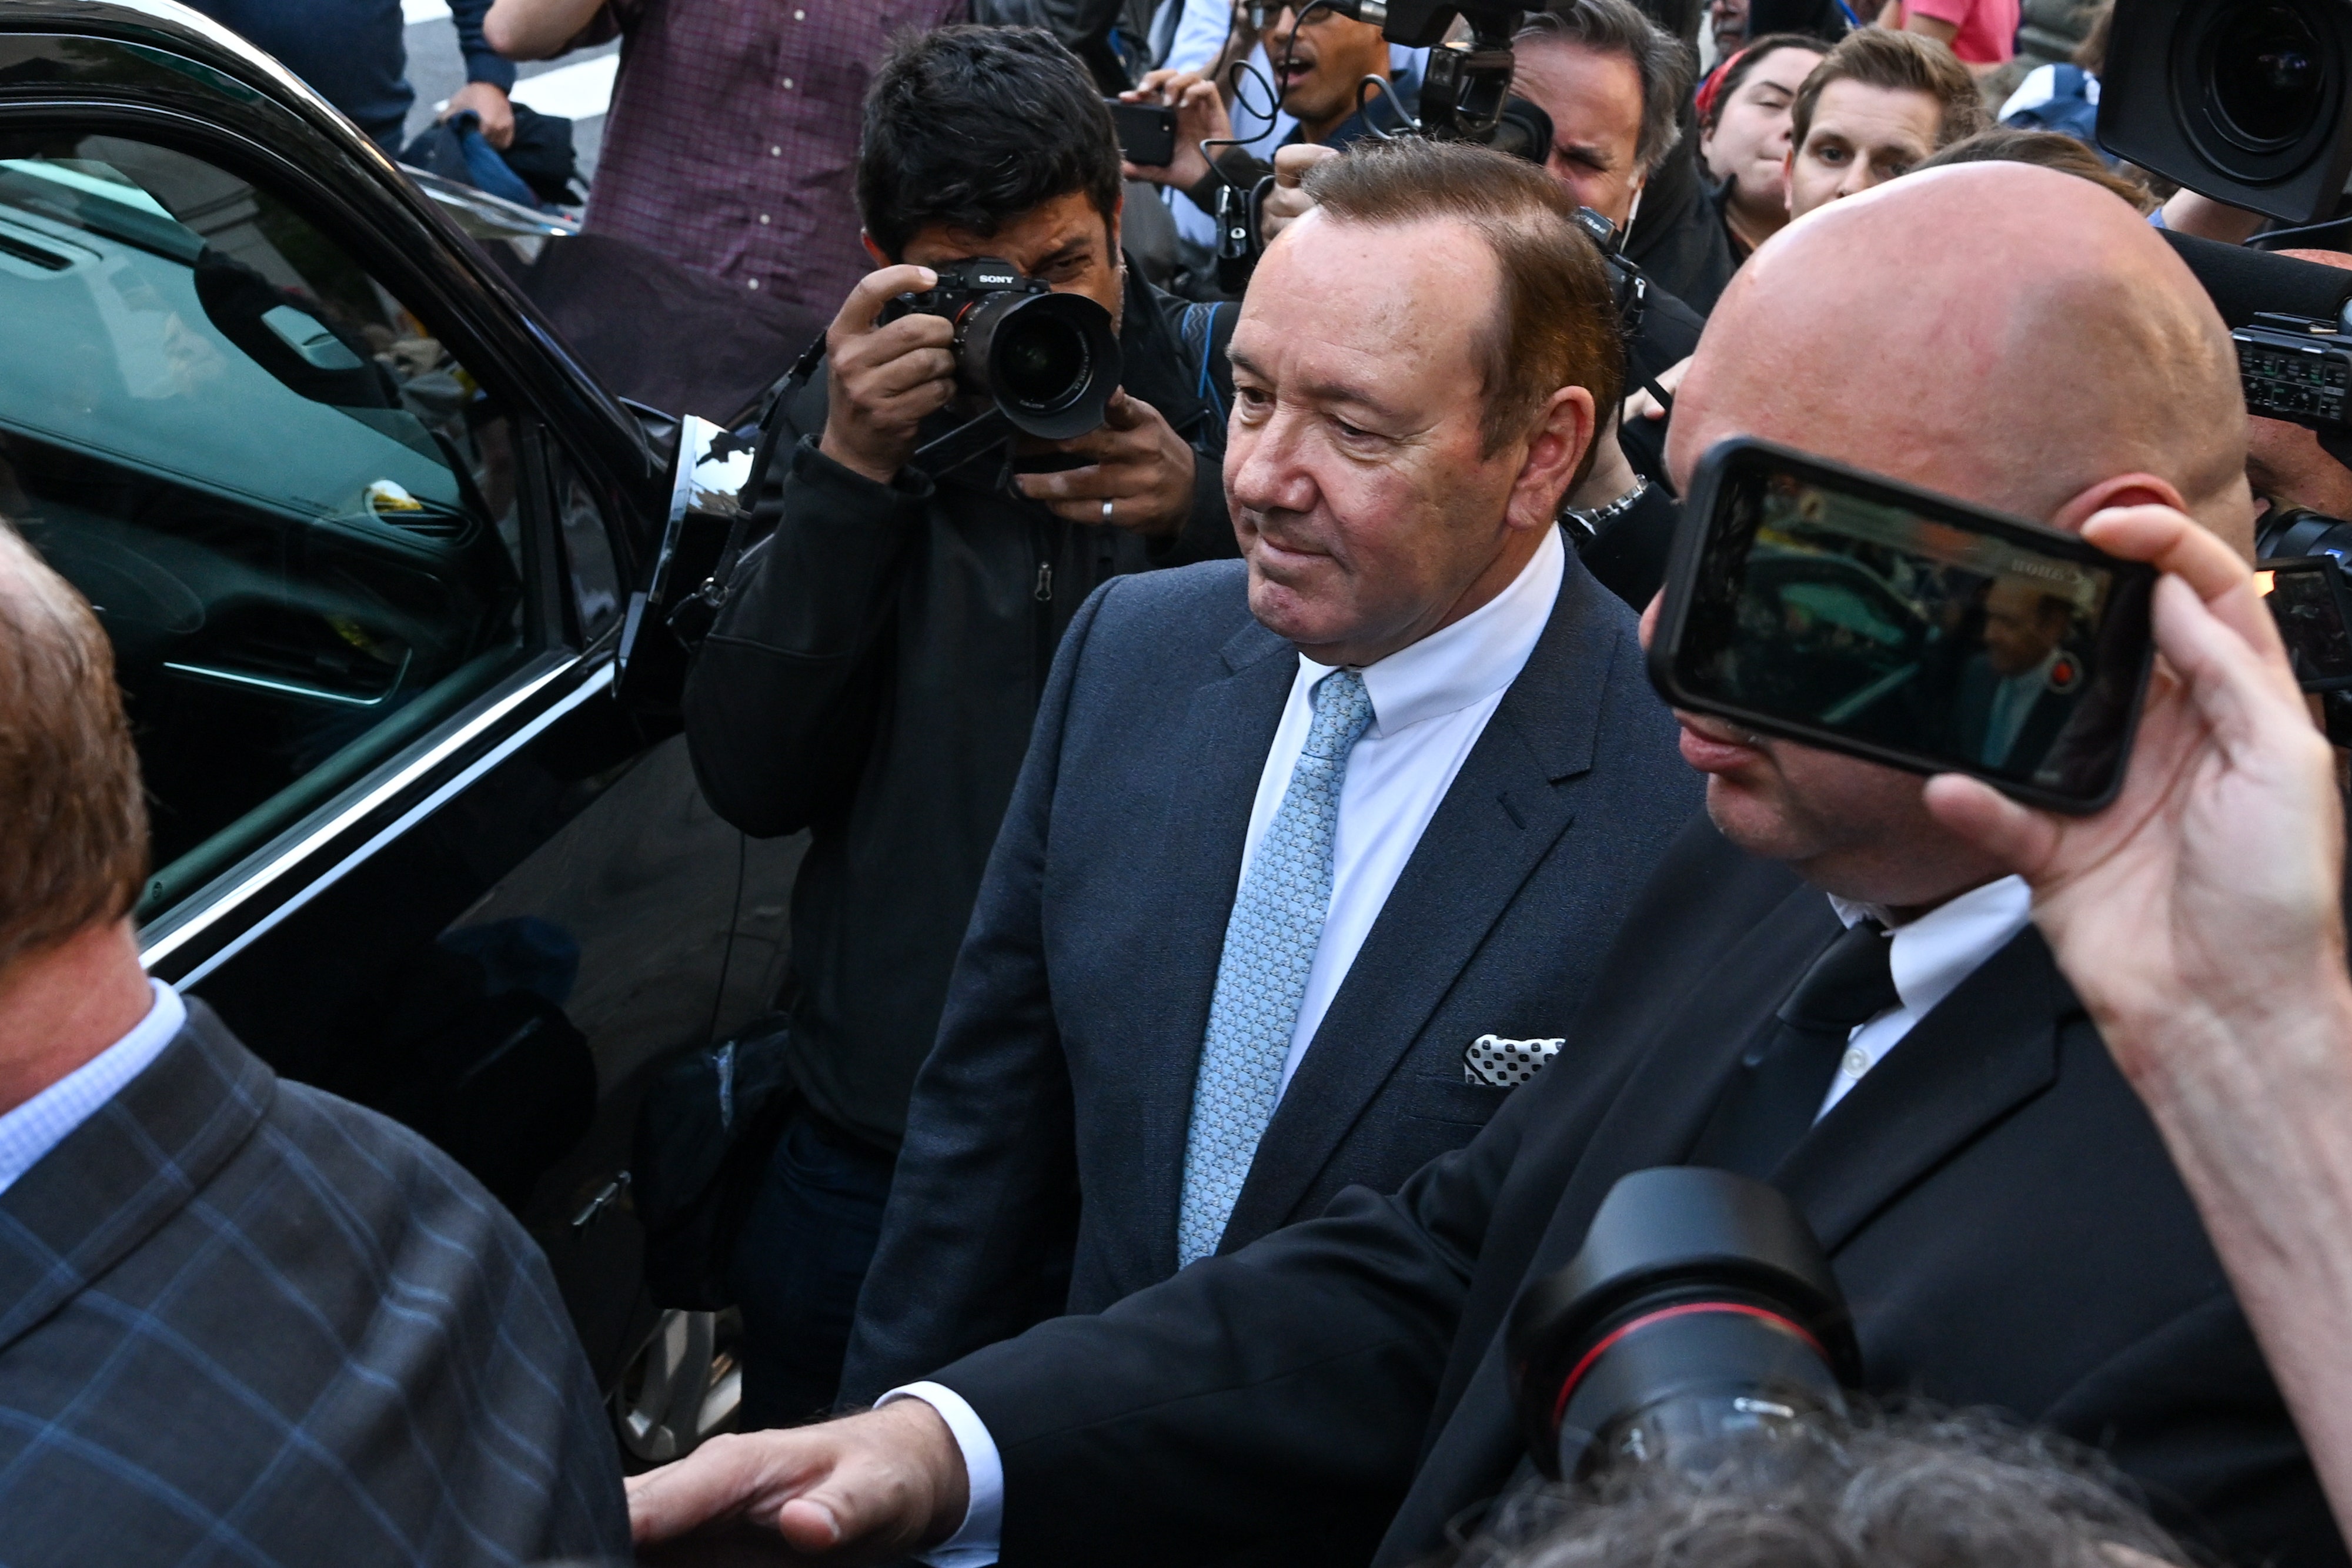 Kevin Spacey’s accuser, Anthony Rapp, grilled at trial